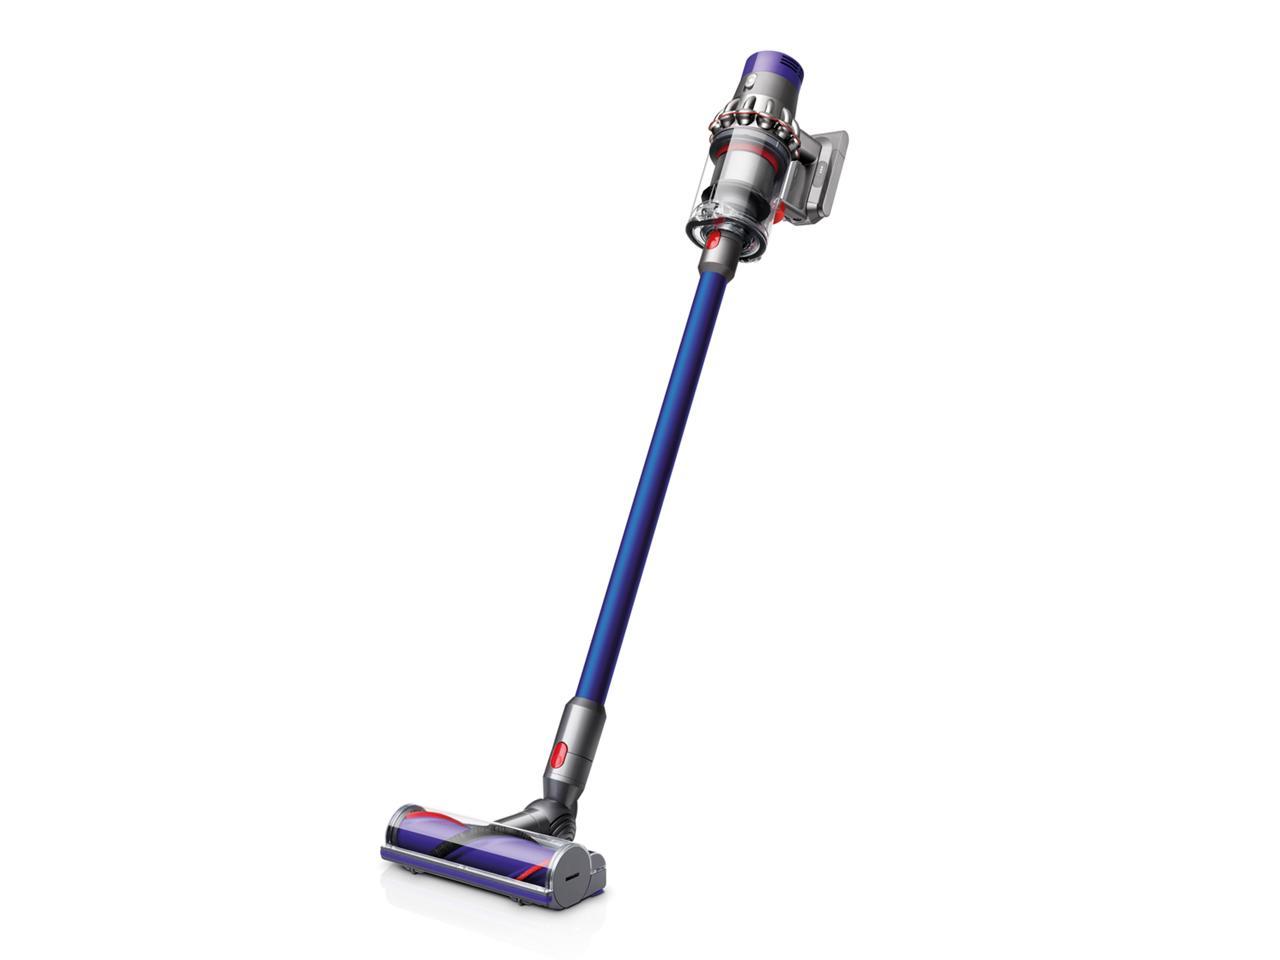 Dyson V10 Allergy Cordfree Vacuum Cleaner | Blue (New Condition) $379.99